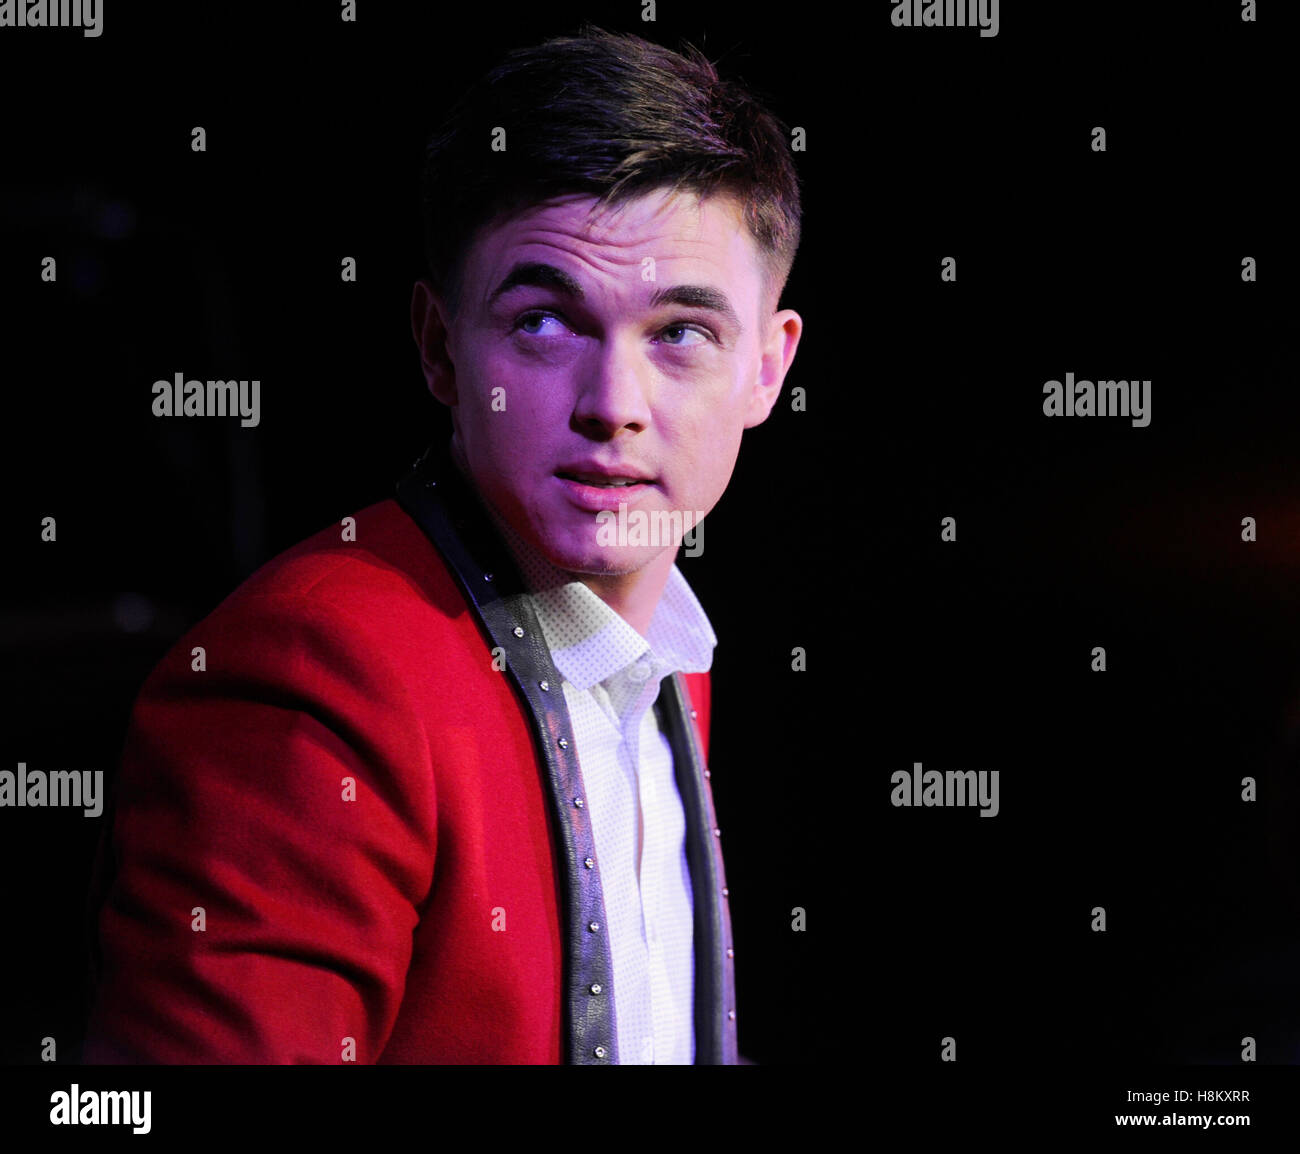 Jesse McCartney performs at the Citadel Outlets Christmas Tree Lighting and Concert on November 9, 2013 in Los Angeles California. Stock Photo